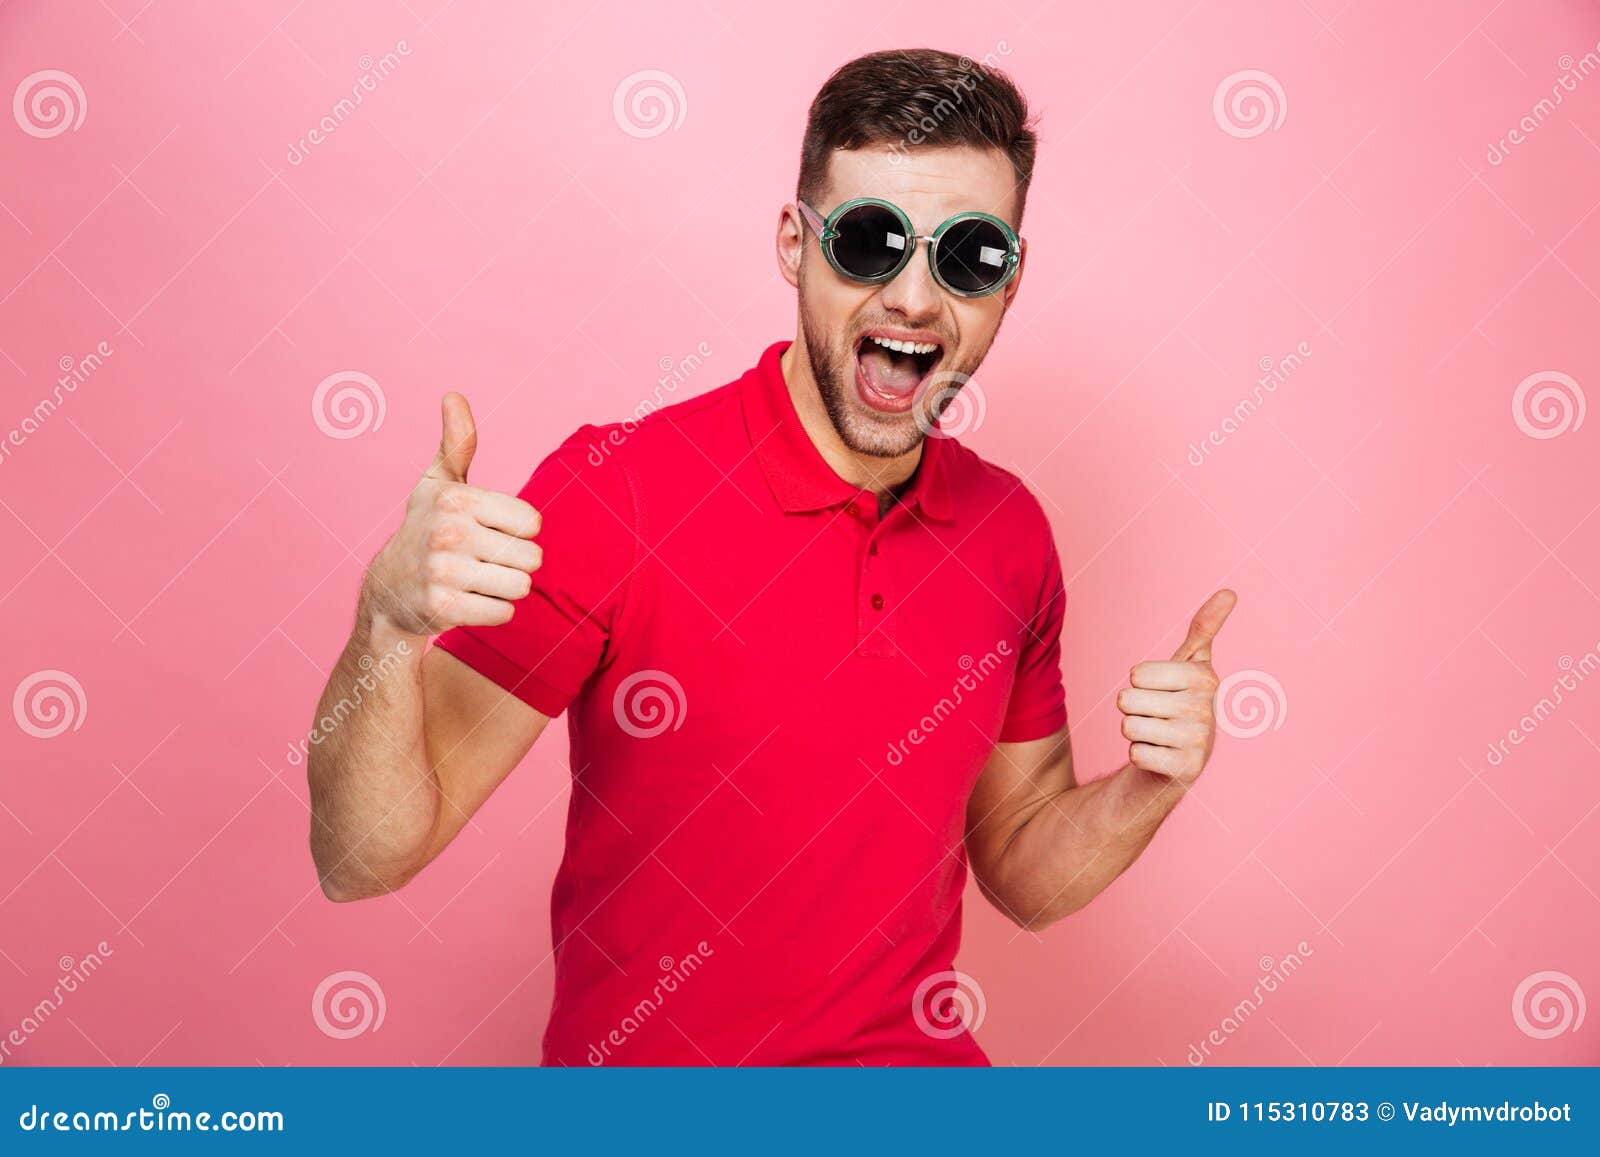 Portrait of a Smiling Young Man in Sunglasses Stock Image - Image of ...